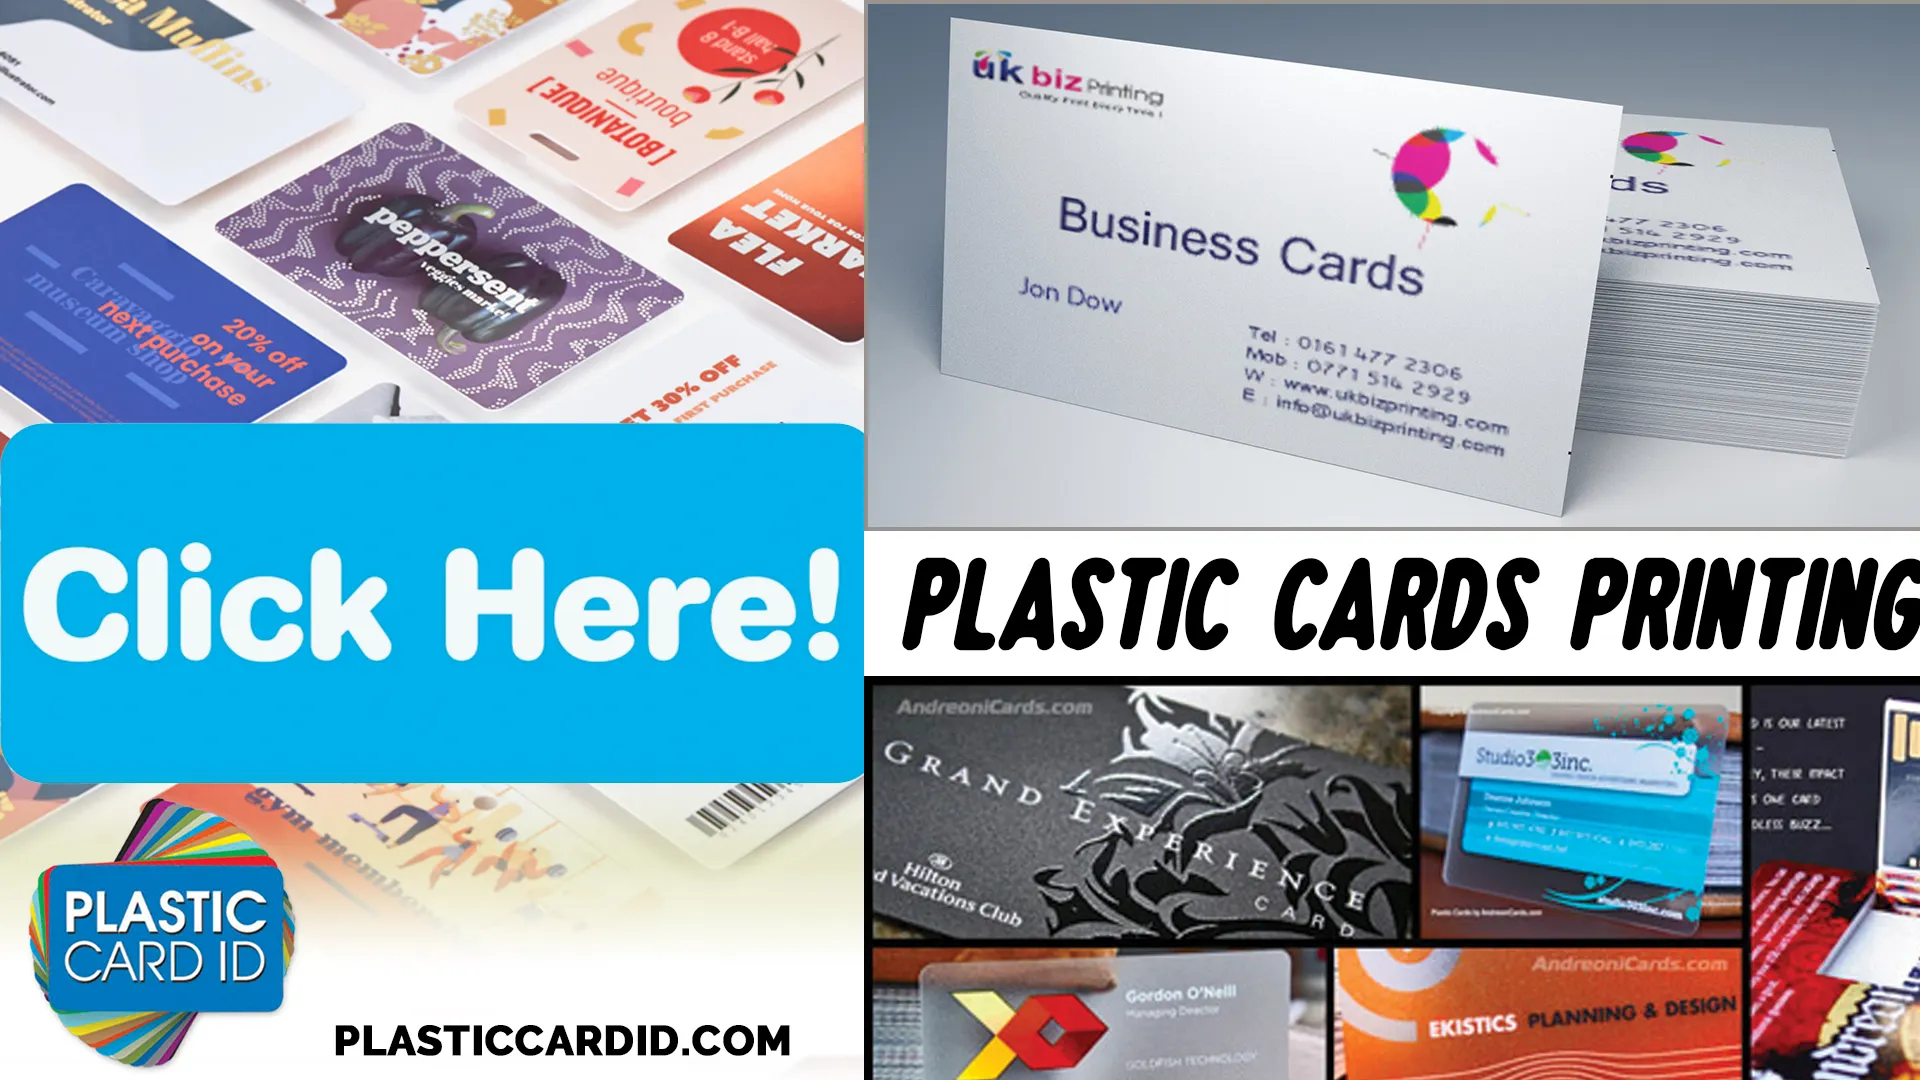 Why Plastic Card ID
 Emphasizes Recycling Plastic Cards